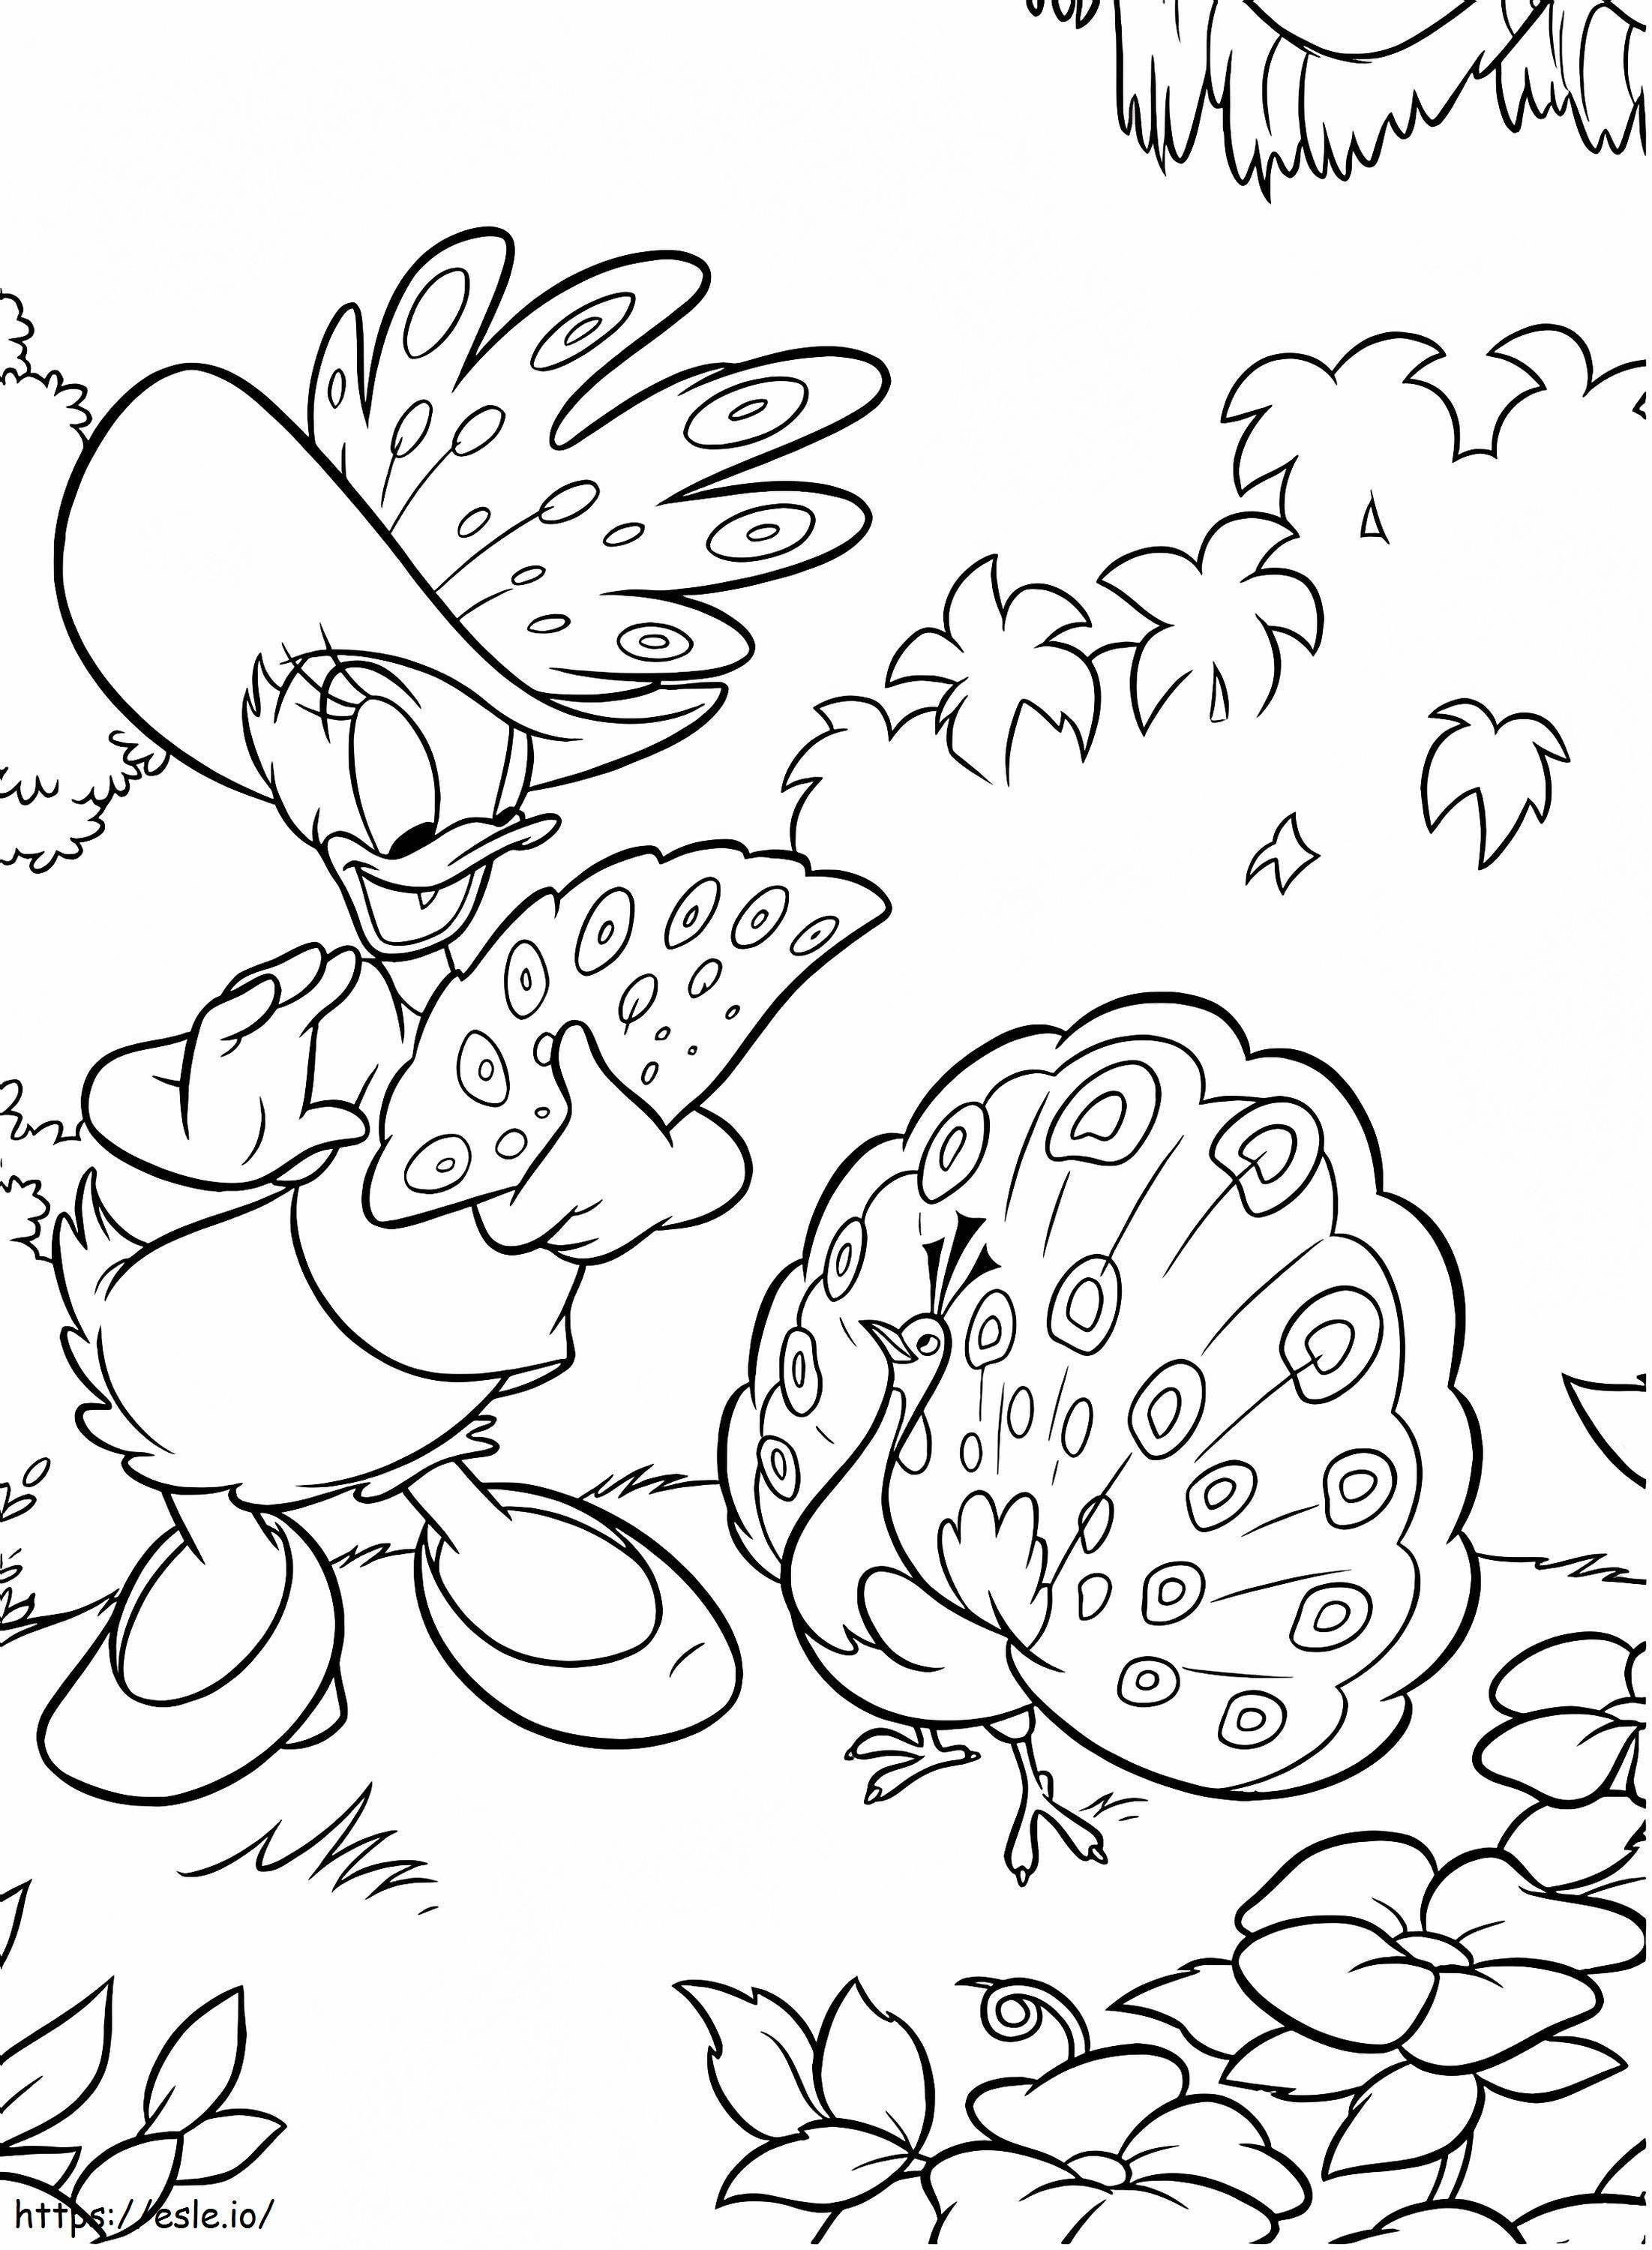 1534756330 Daisy With Peacock A4 coloring page